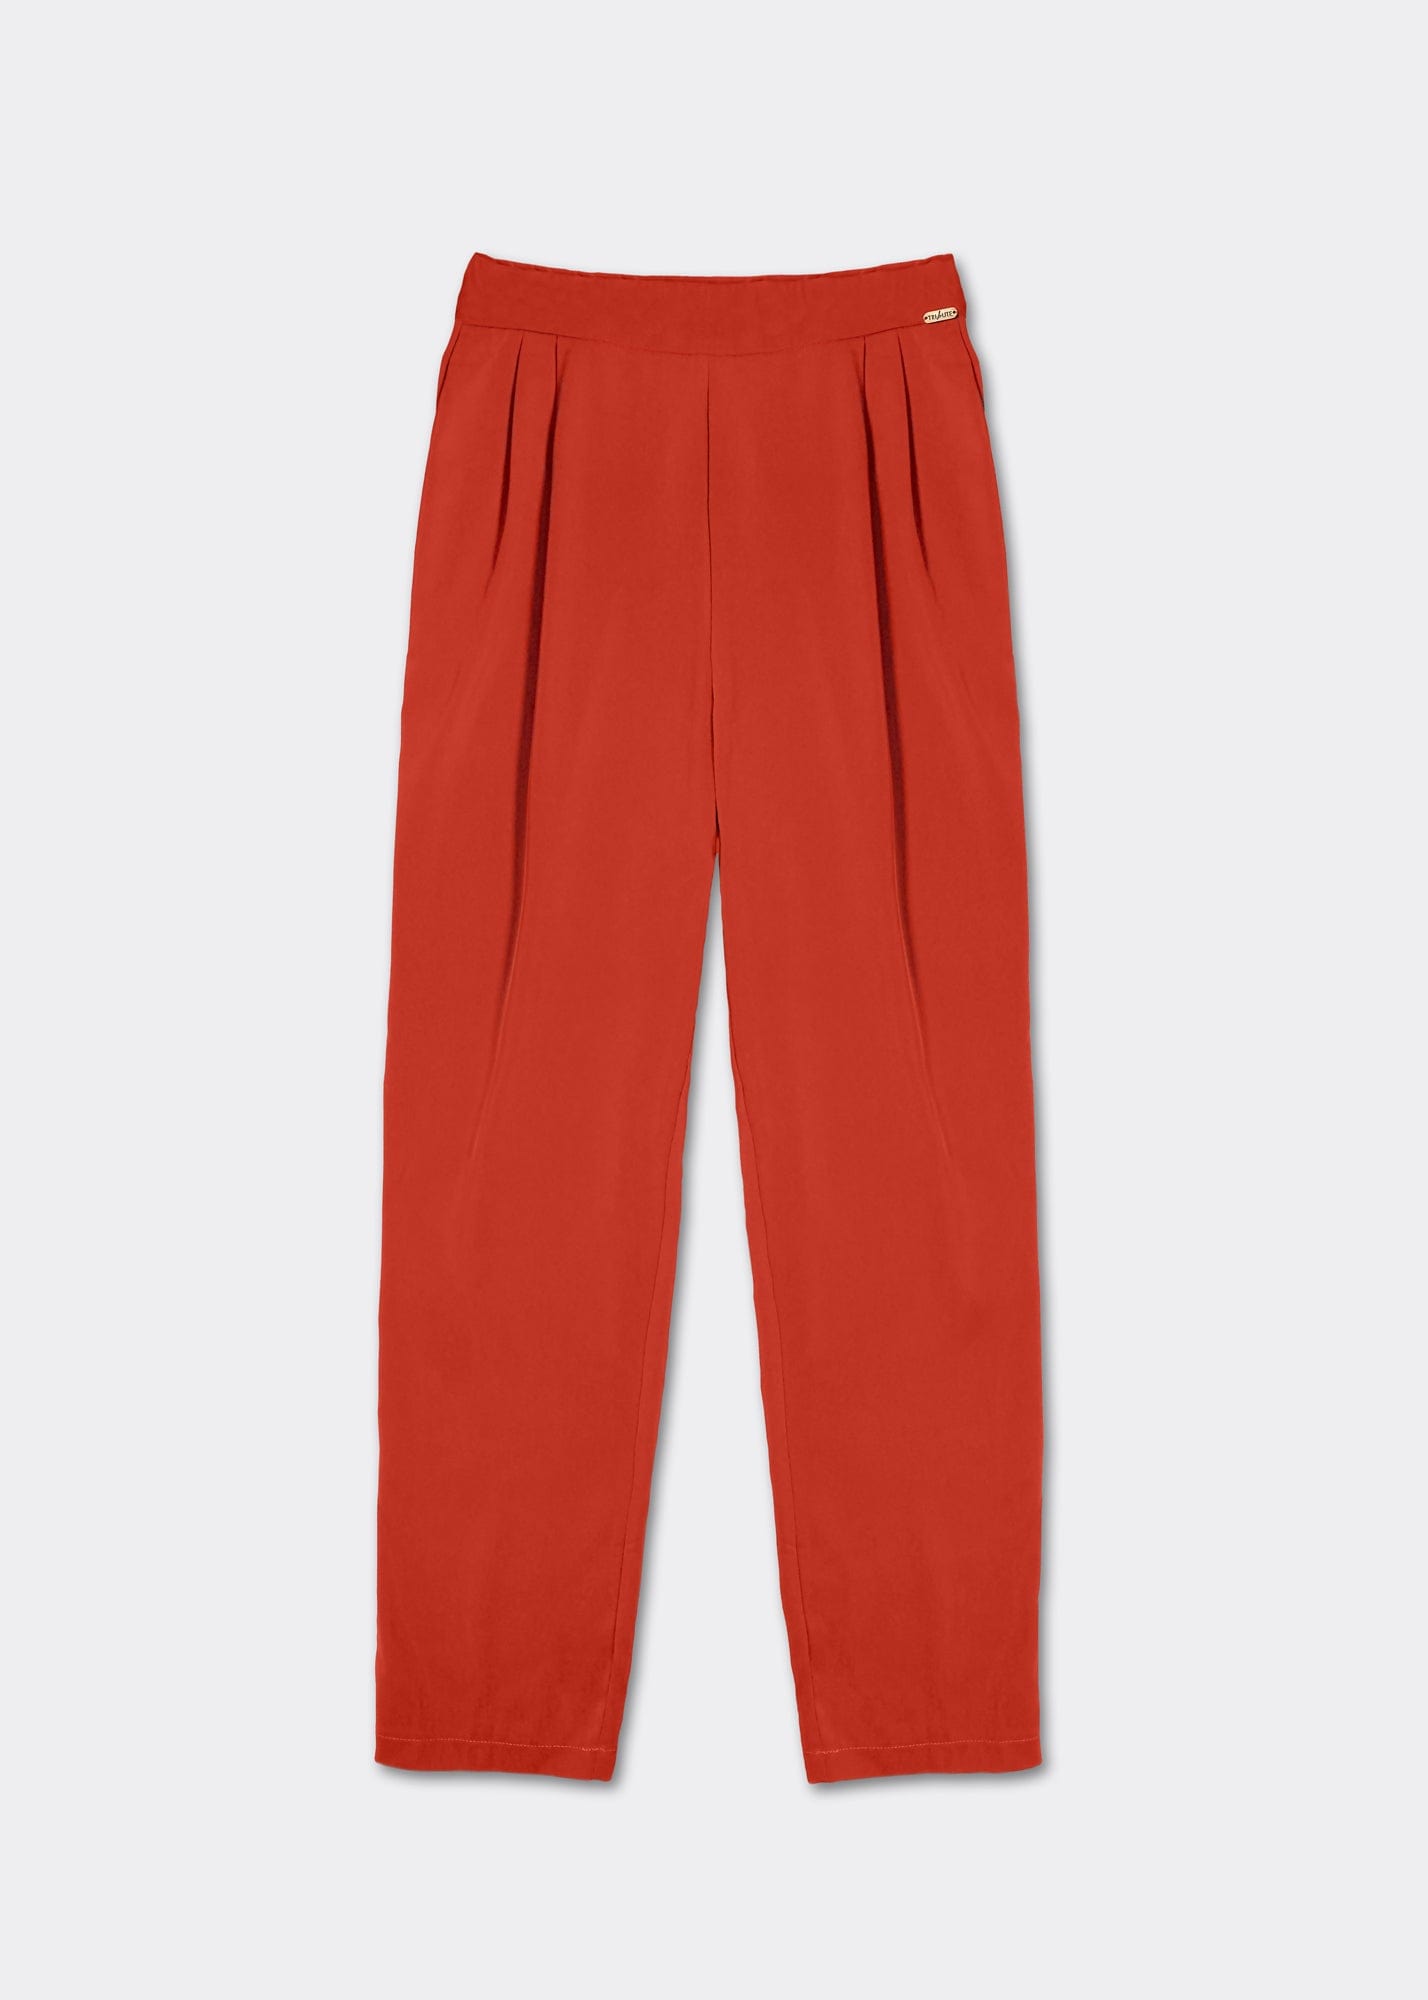 High Waisted Cigarette Pants In Rust - Tribute StoreTRIBUTE